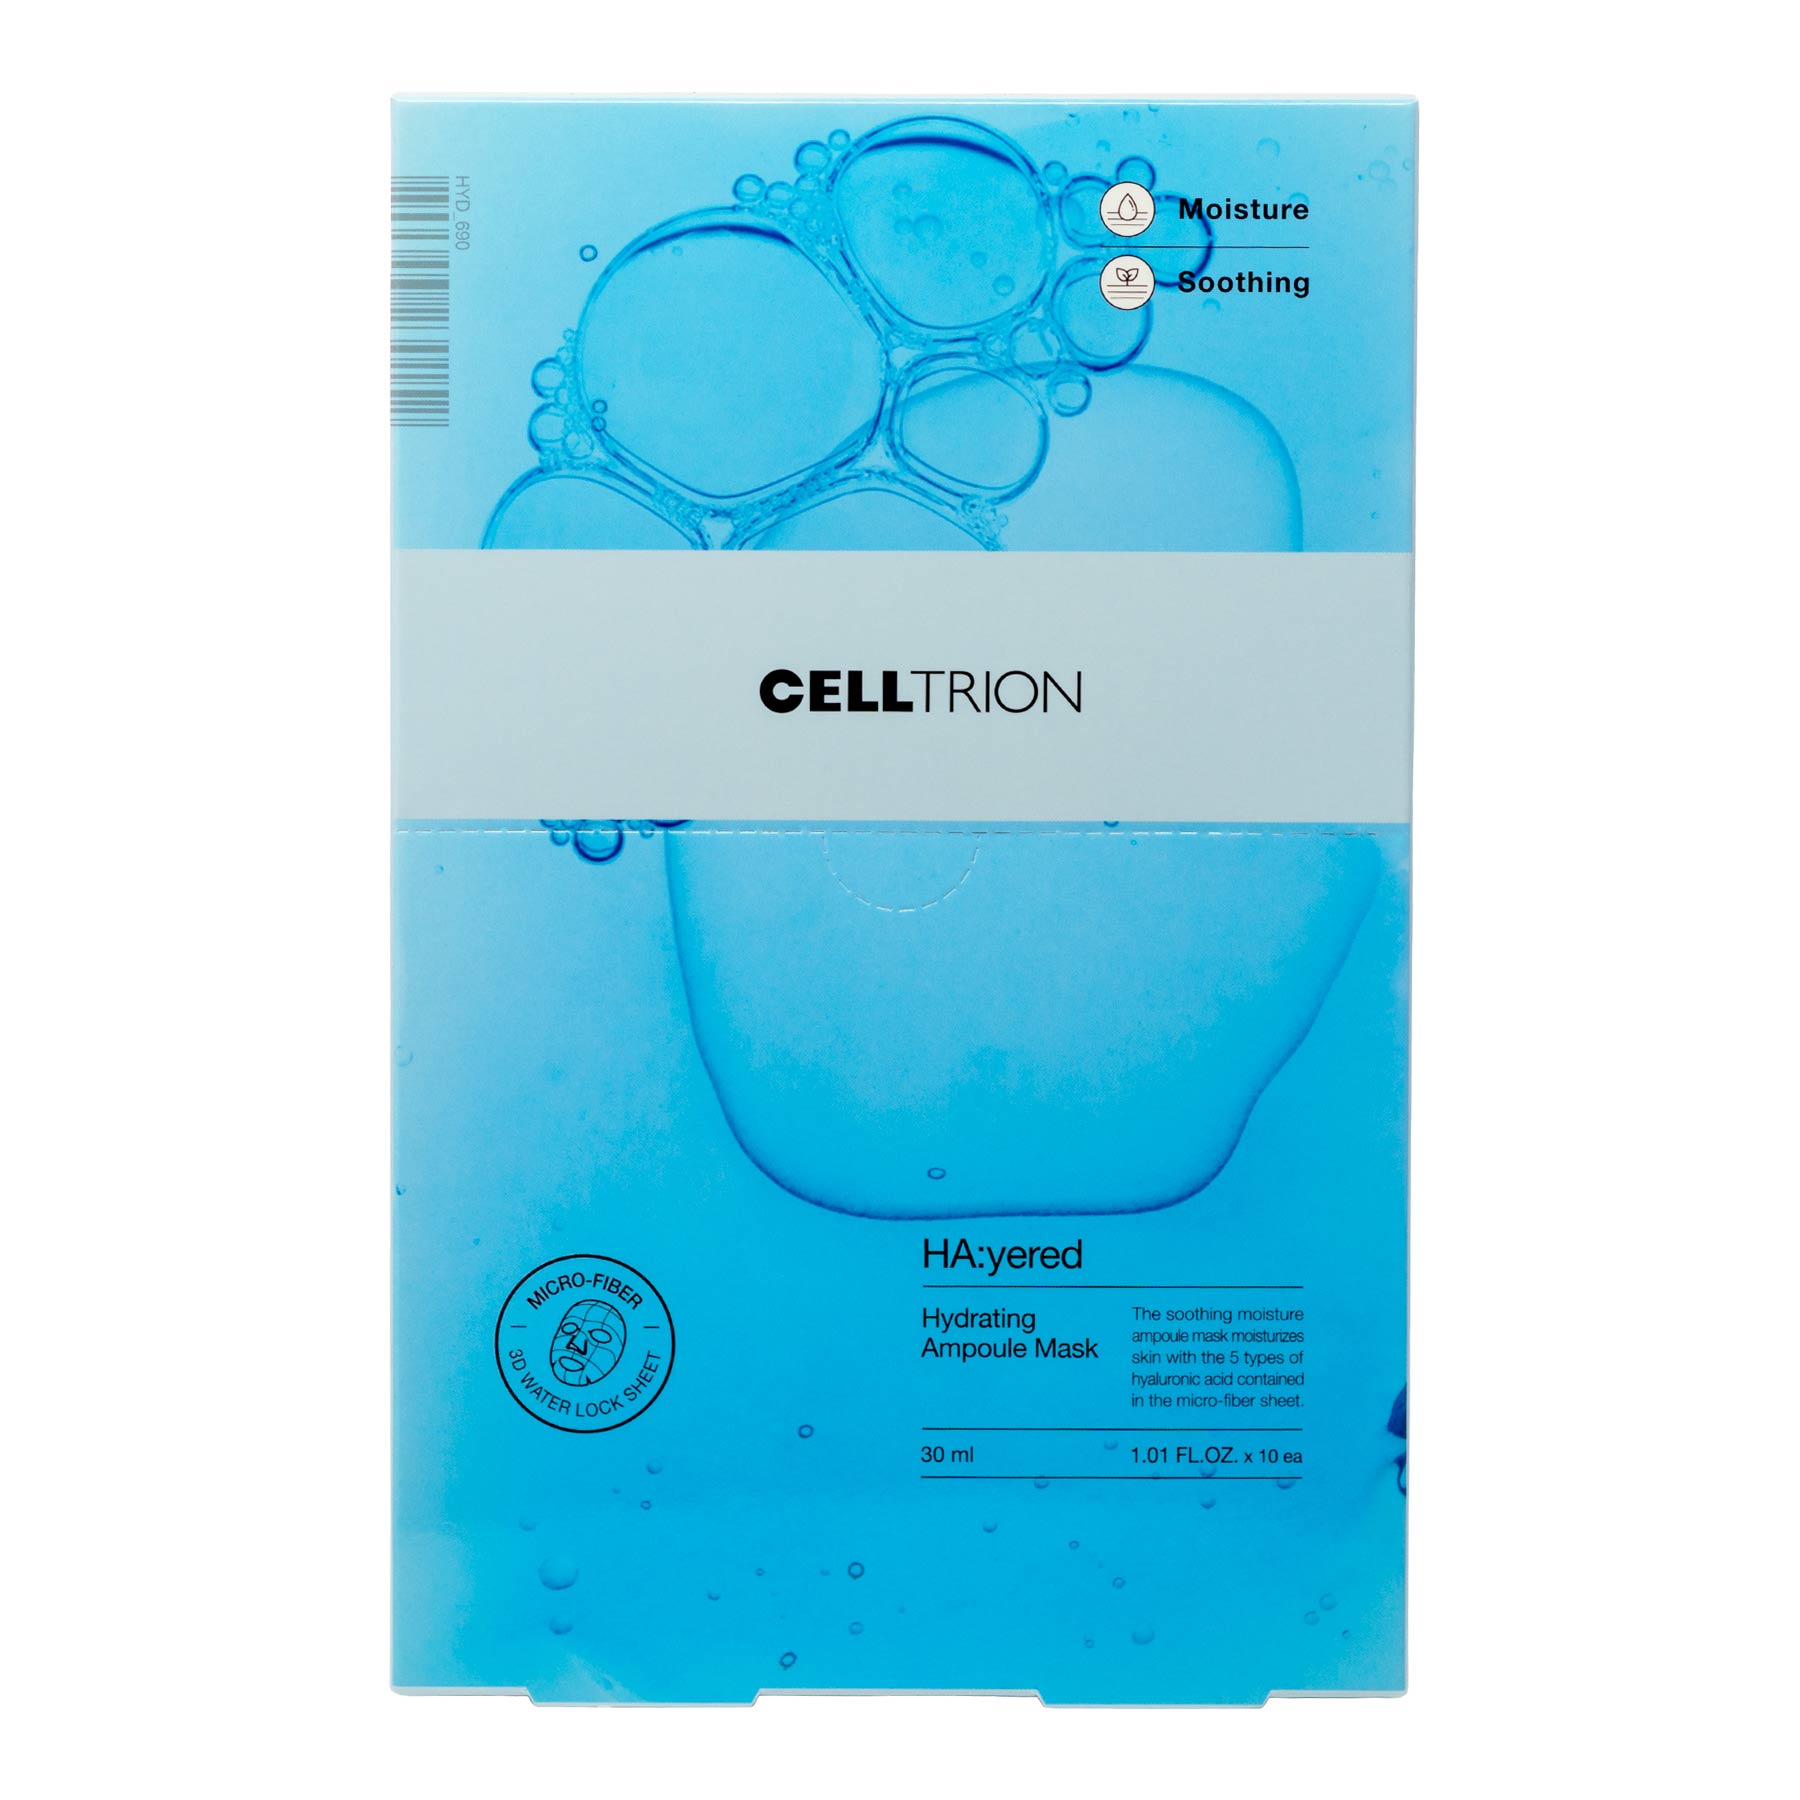 Packaging for CELLTRION HA:yered Hydrating Ampoule Mask. The front of the package is predominantly blue with a design that includes bubbles and a clear depiction of a water drop, symbolizing hydration. Key features noted on the package include 'Moisture' and 'Soothing'. The mask is contained in a micro-fiber sheet for better absorption, as indicated by a seal that reads 'Micro Fiber 10 Times Water Lock'. The package states a volume of 30 ml or 1.01 FL OZ and contains 10 pieces.